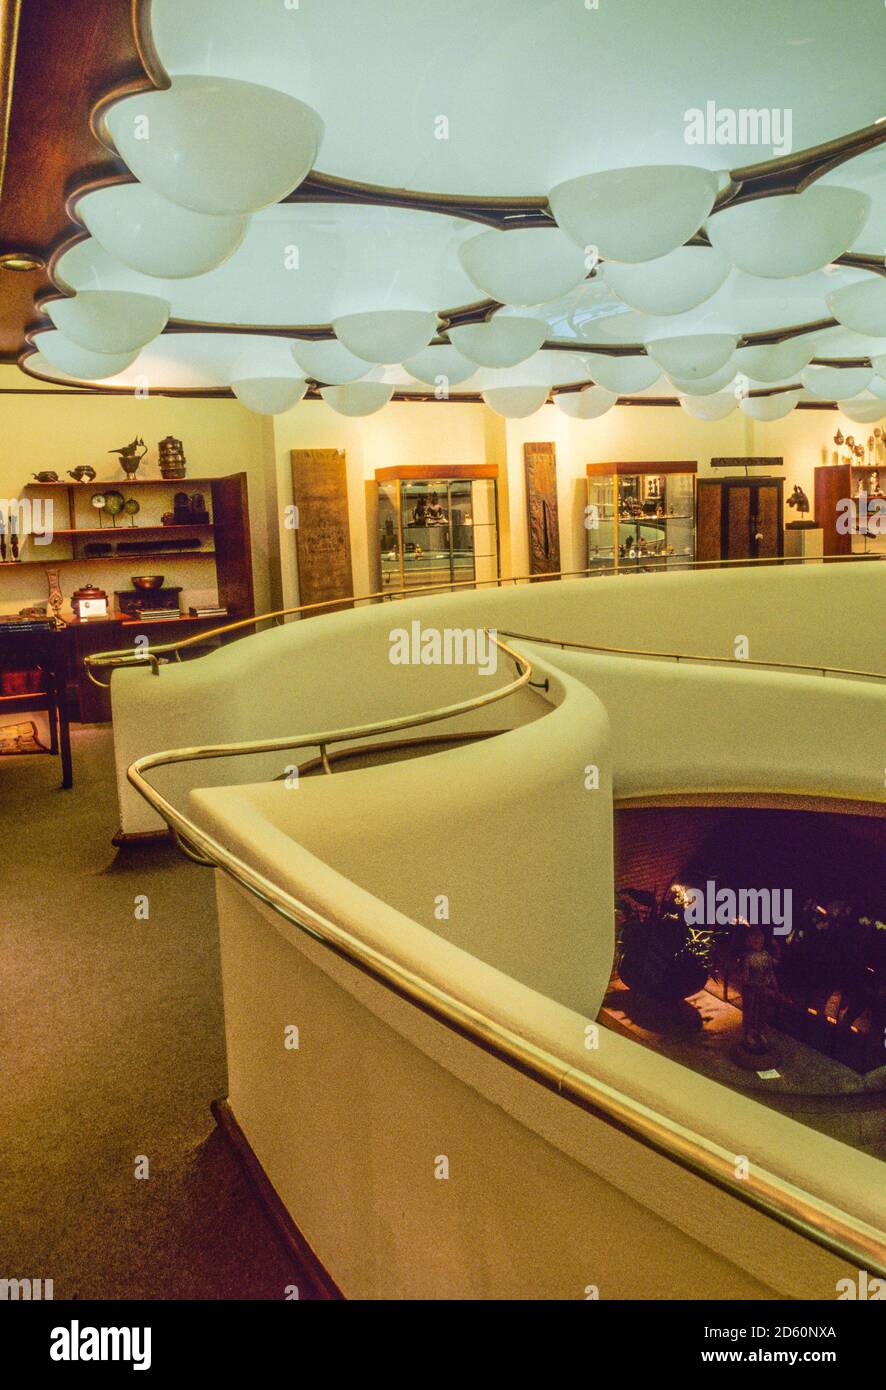 Frank Lloyd Wright's V.C. Morris Gift Store, San Francisco, California, for many years home to  Xanadu Gallery.  Now occupied by Isaia menswear store. Interior shot showing spiral ramp to second floor during Xanadu days. 2005 view. Stock Photo